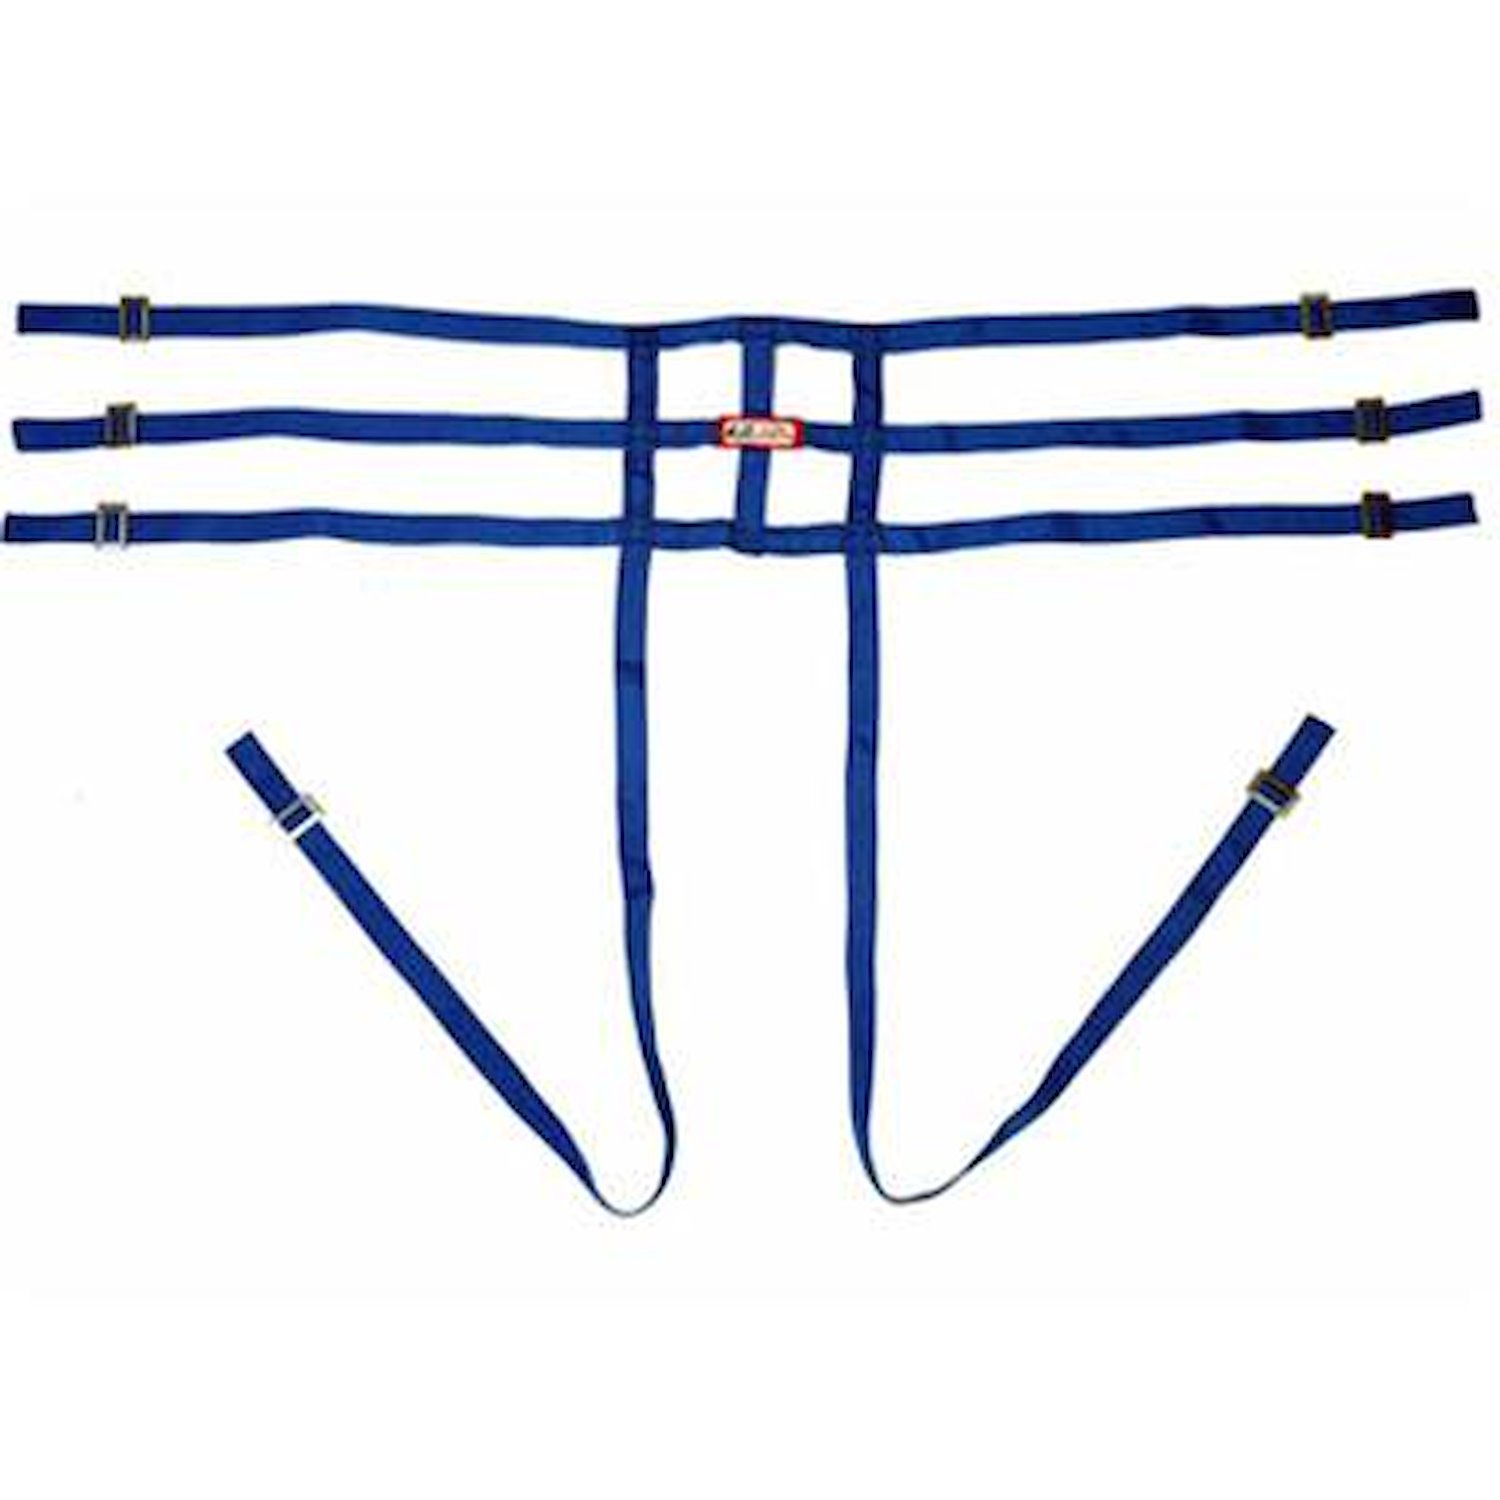 Leg Containment Net for JD s & QM s NON-SFI RED